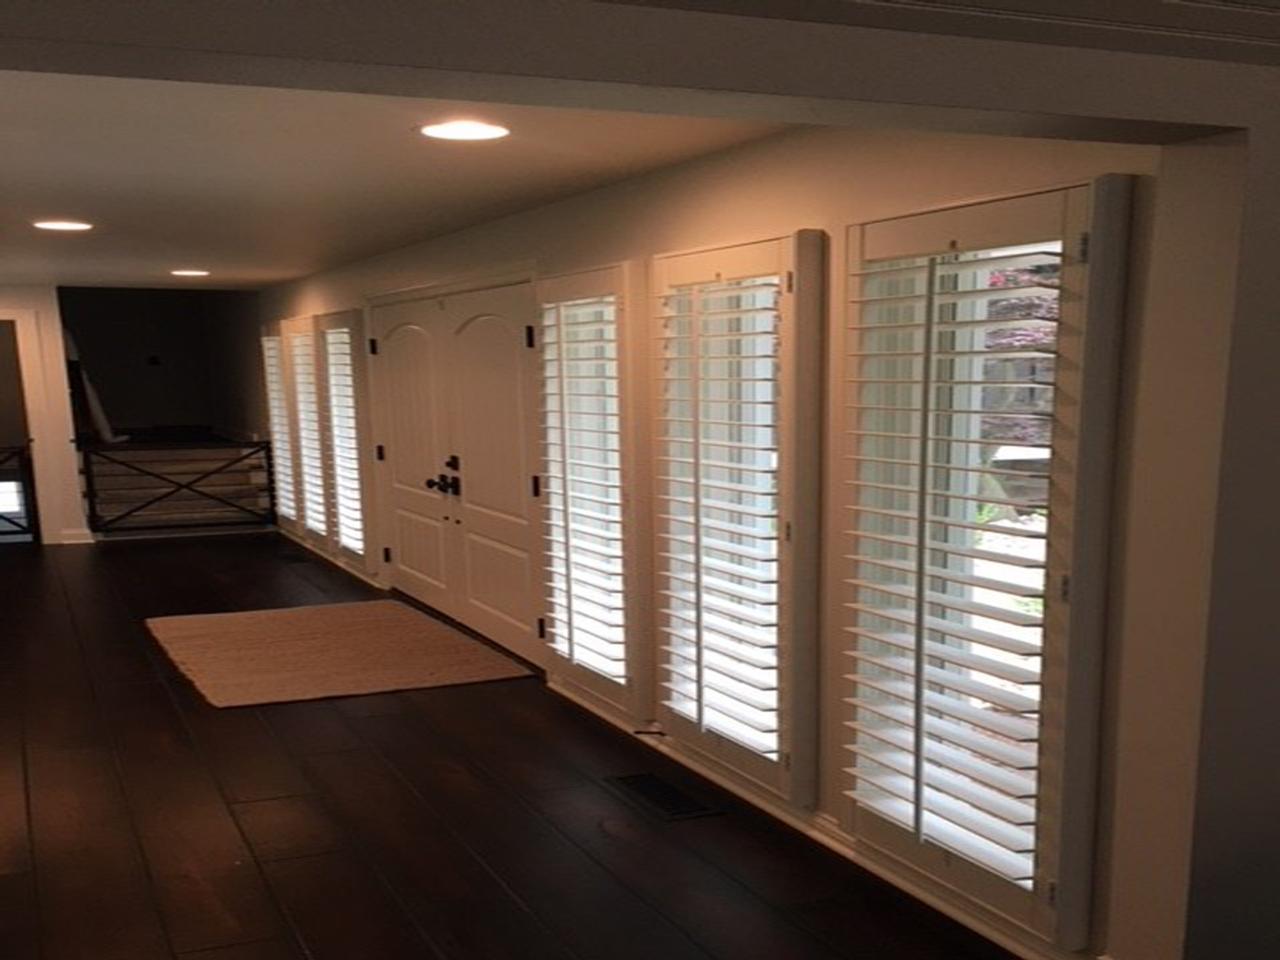 Windows by double front doors covered with plantation shutters